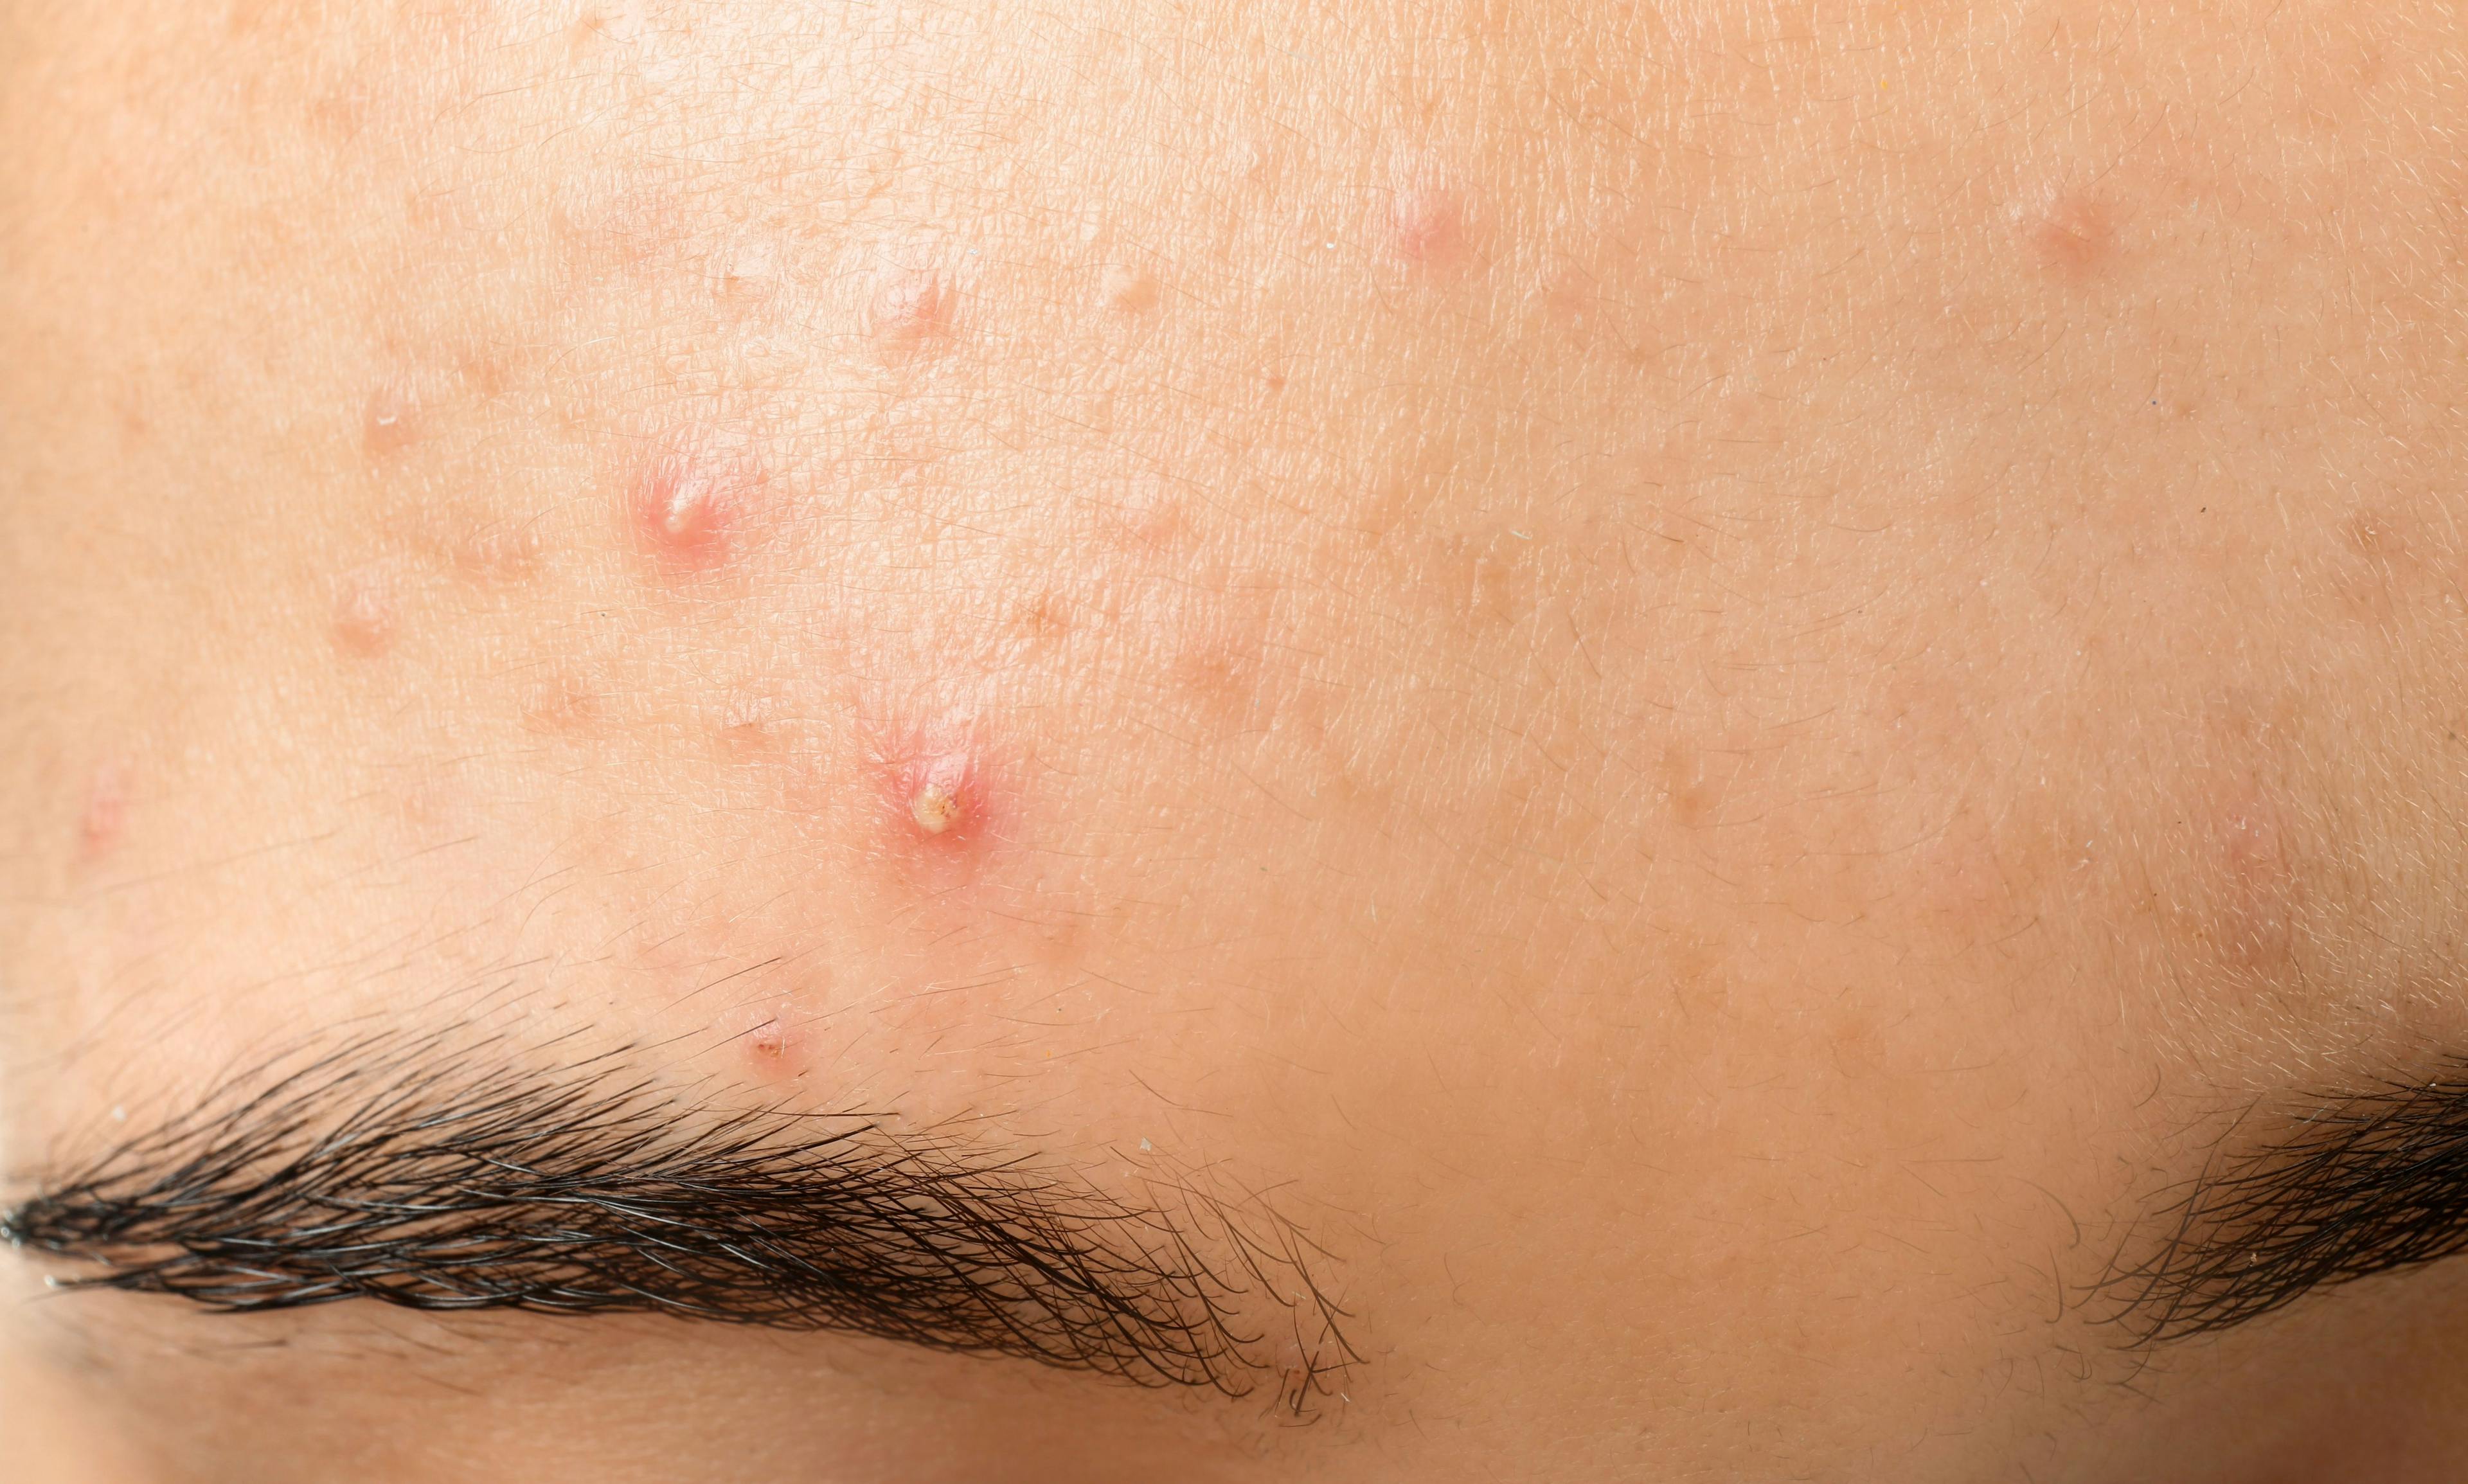 IDP-126 Gel Demonstrates Superior Efficacy in Moderate-to-Severe Acne